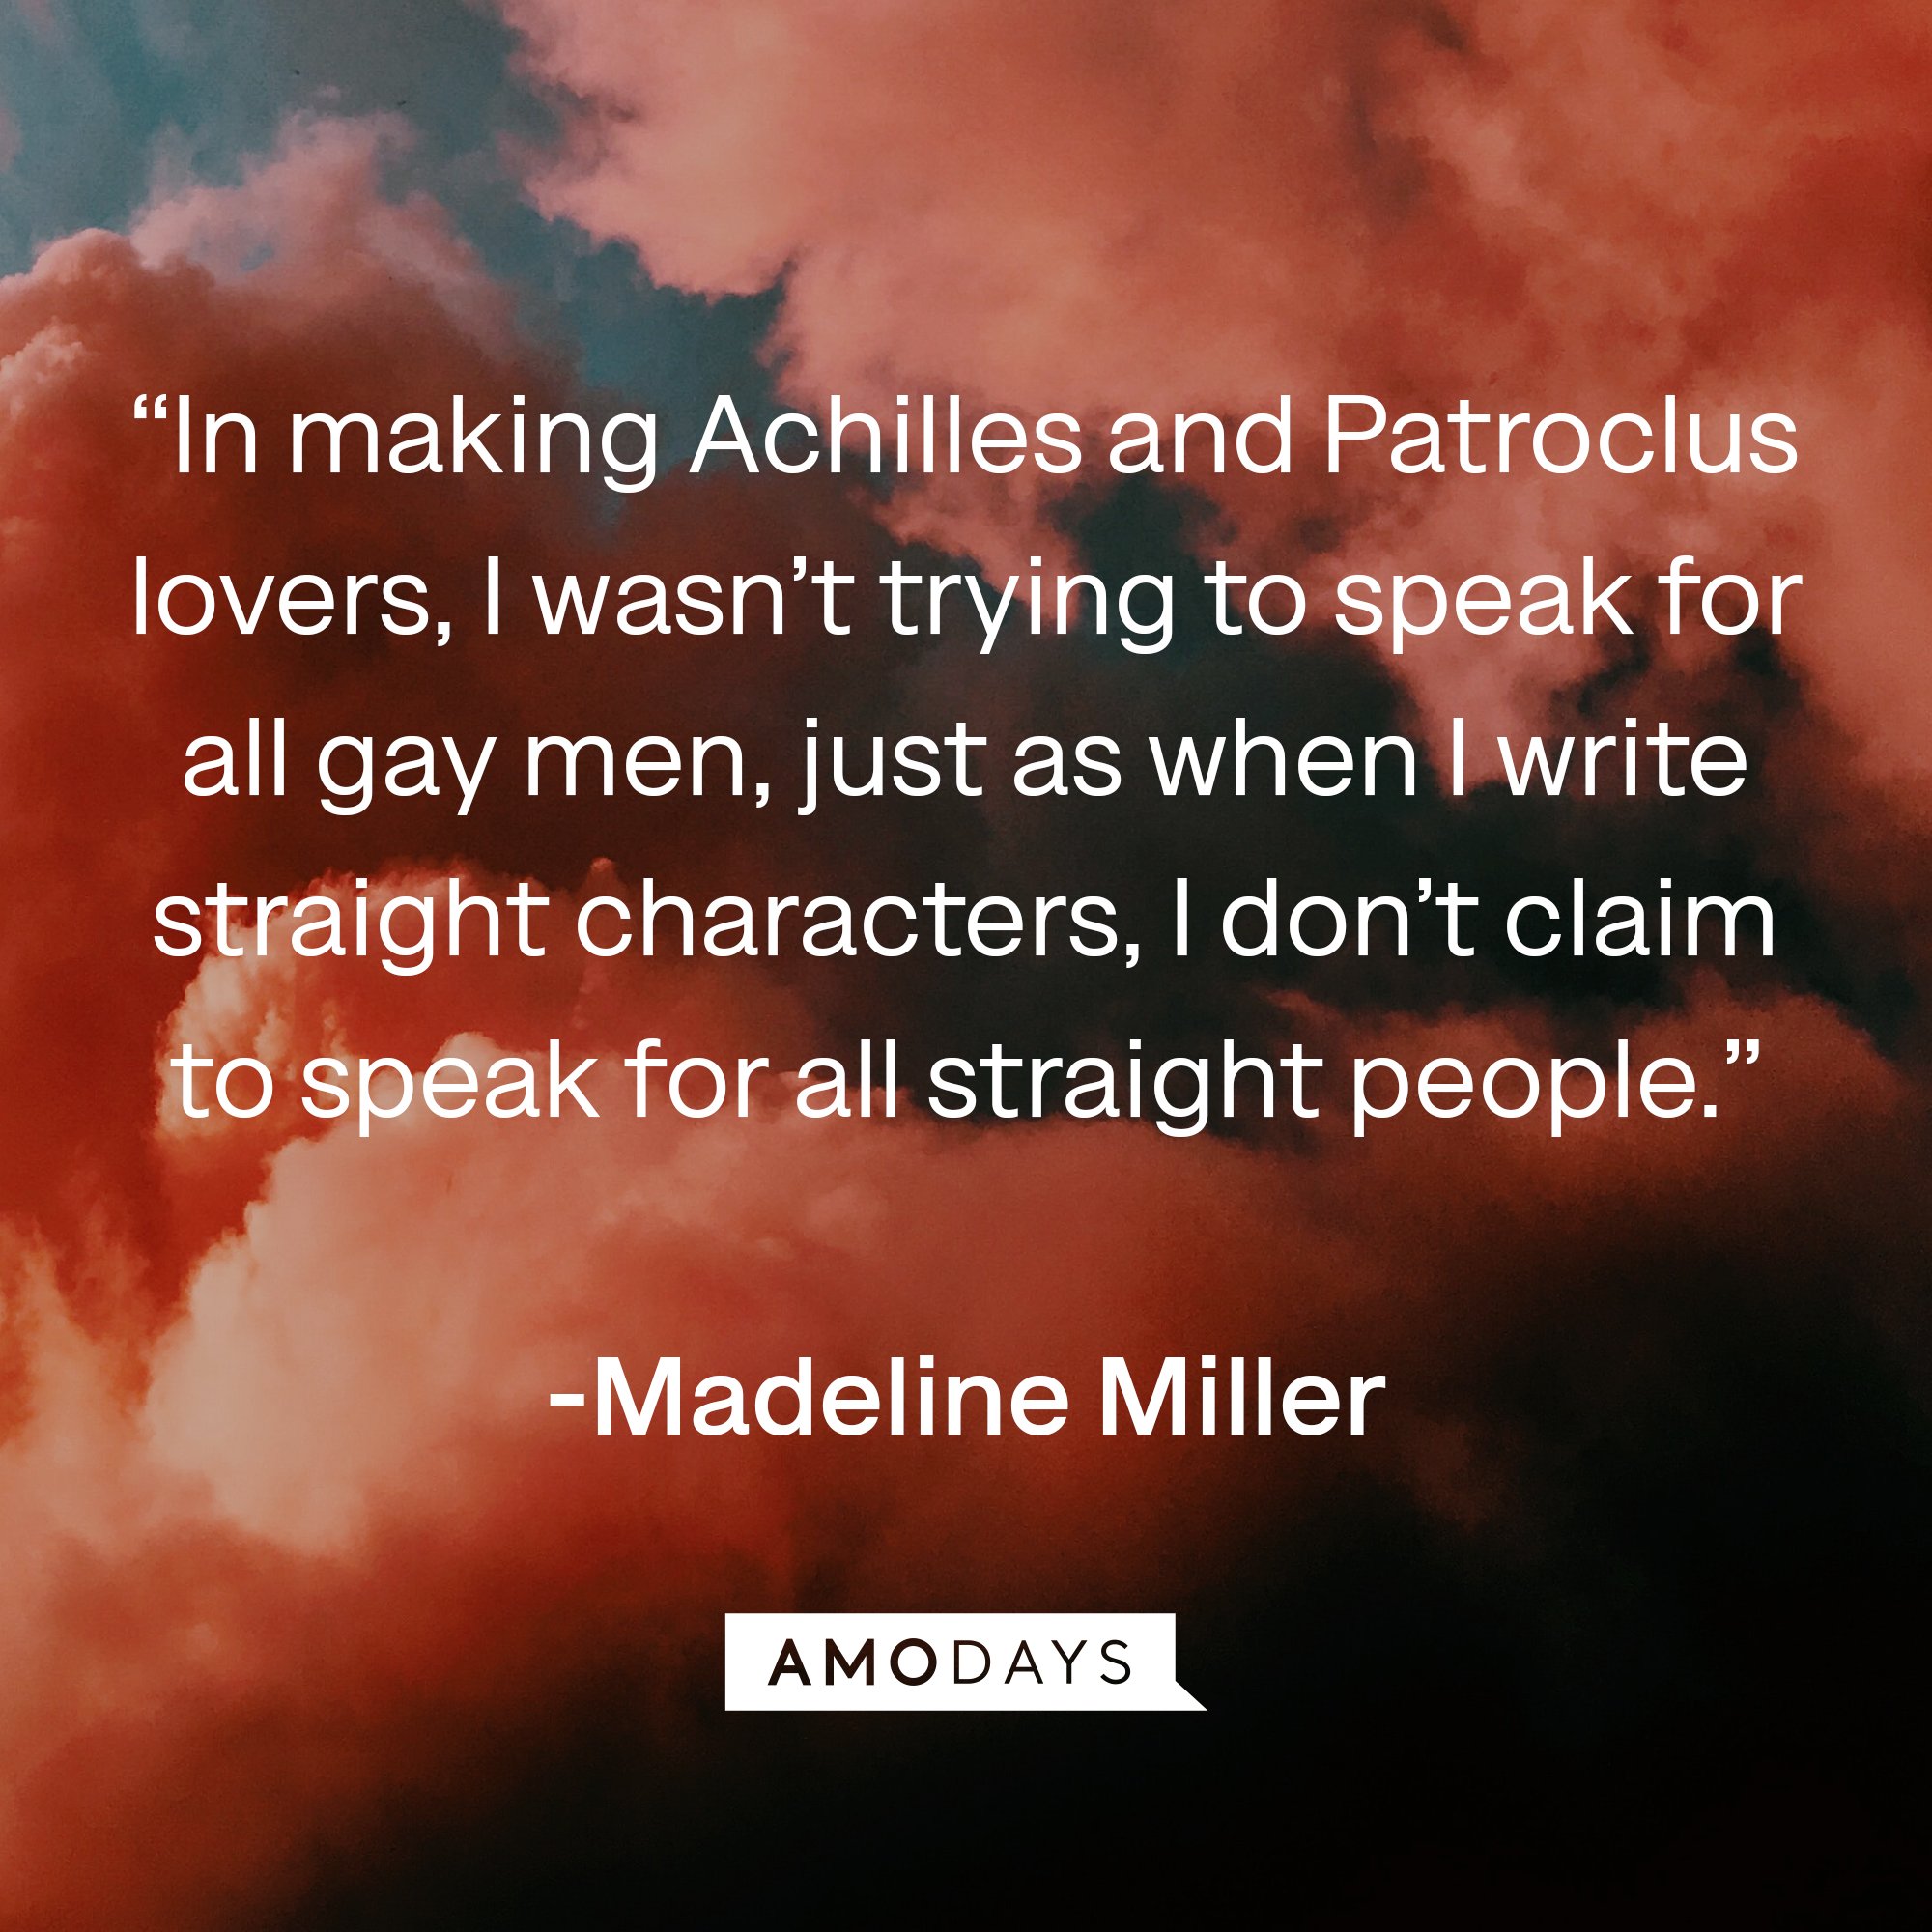 Madeline Miller's quote: “In making Achilles and Patroclus lovers, I wasn’t trying to speak for all gay men, just as when I write straight characters, I don’t claim to speak for all straight people.” | Image: AmoDays